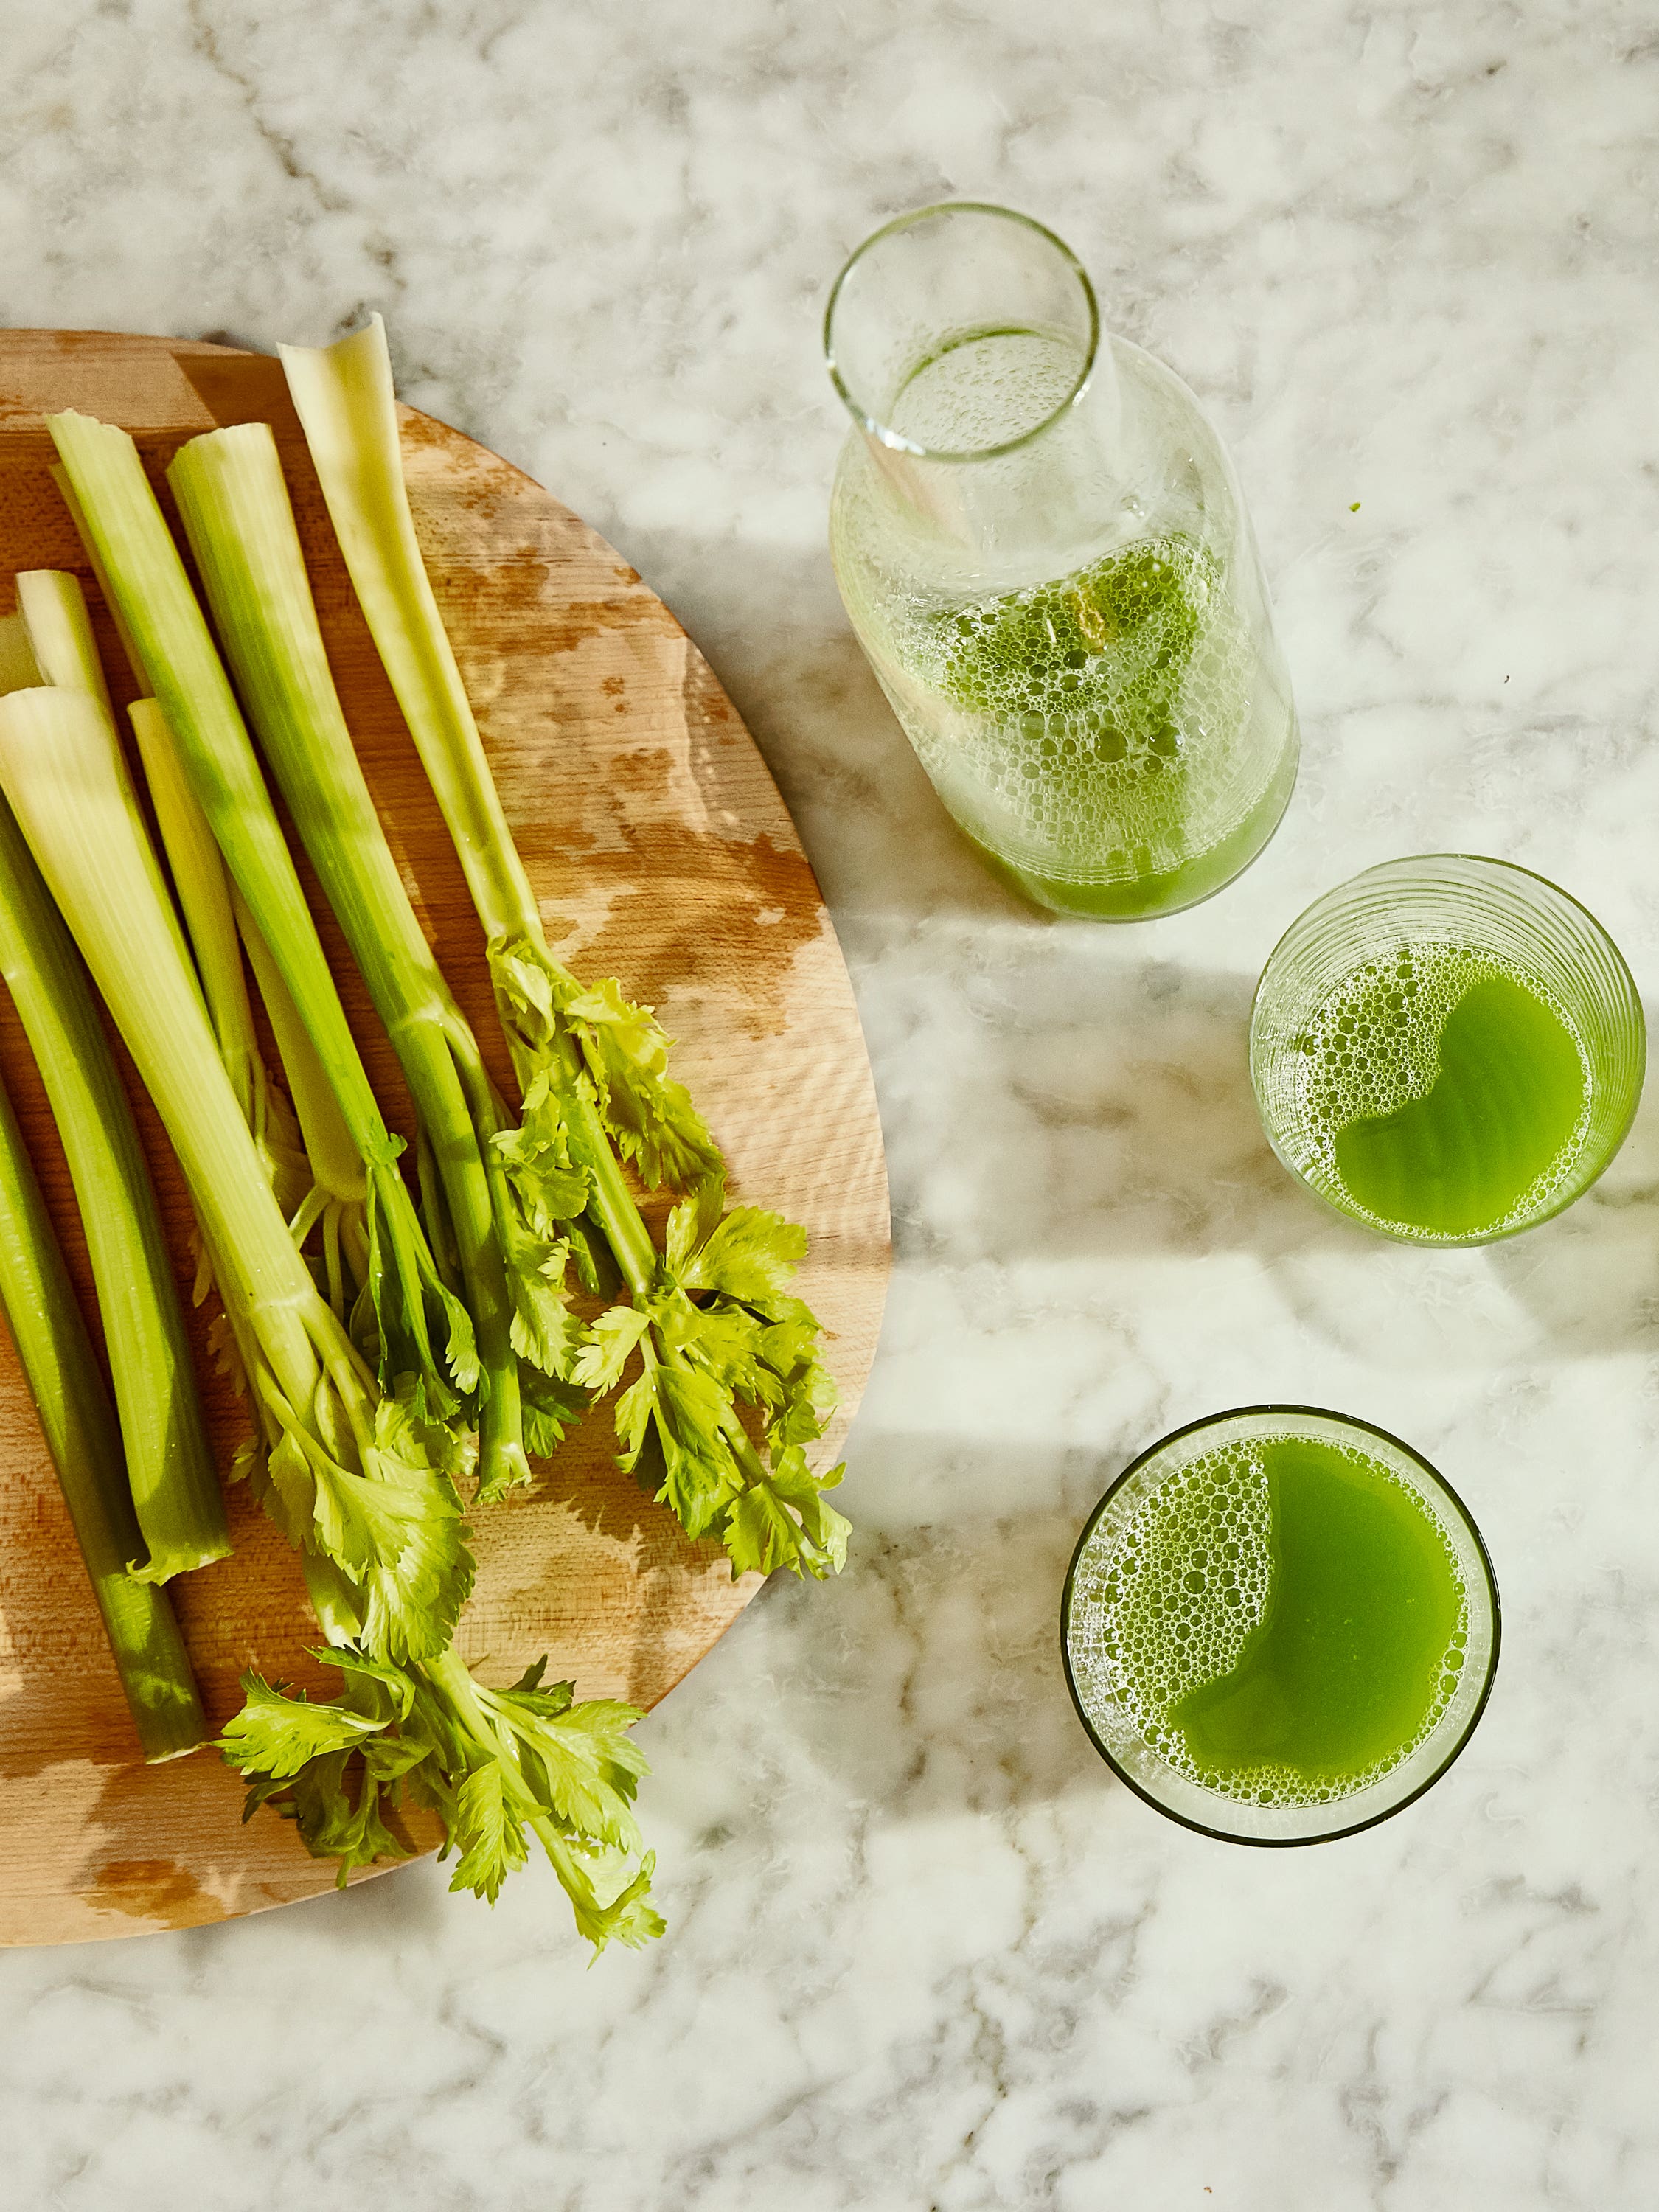 Why Is Everyone Drinking Celery Juice?